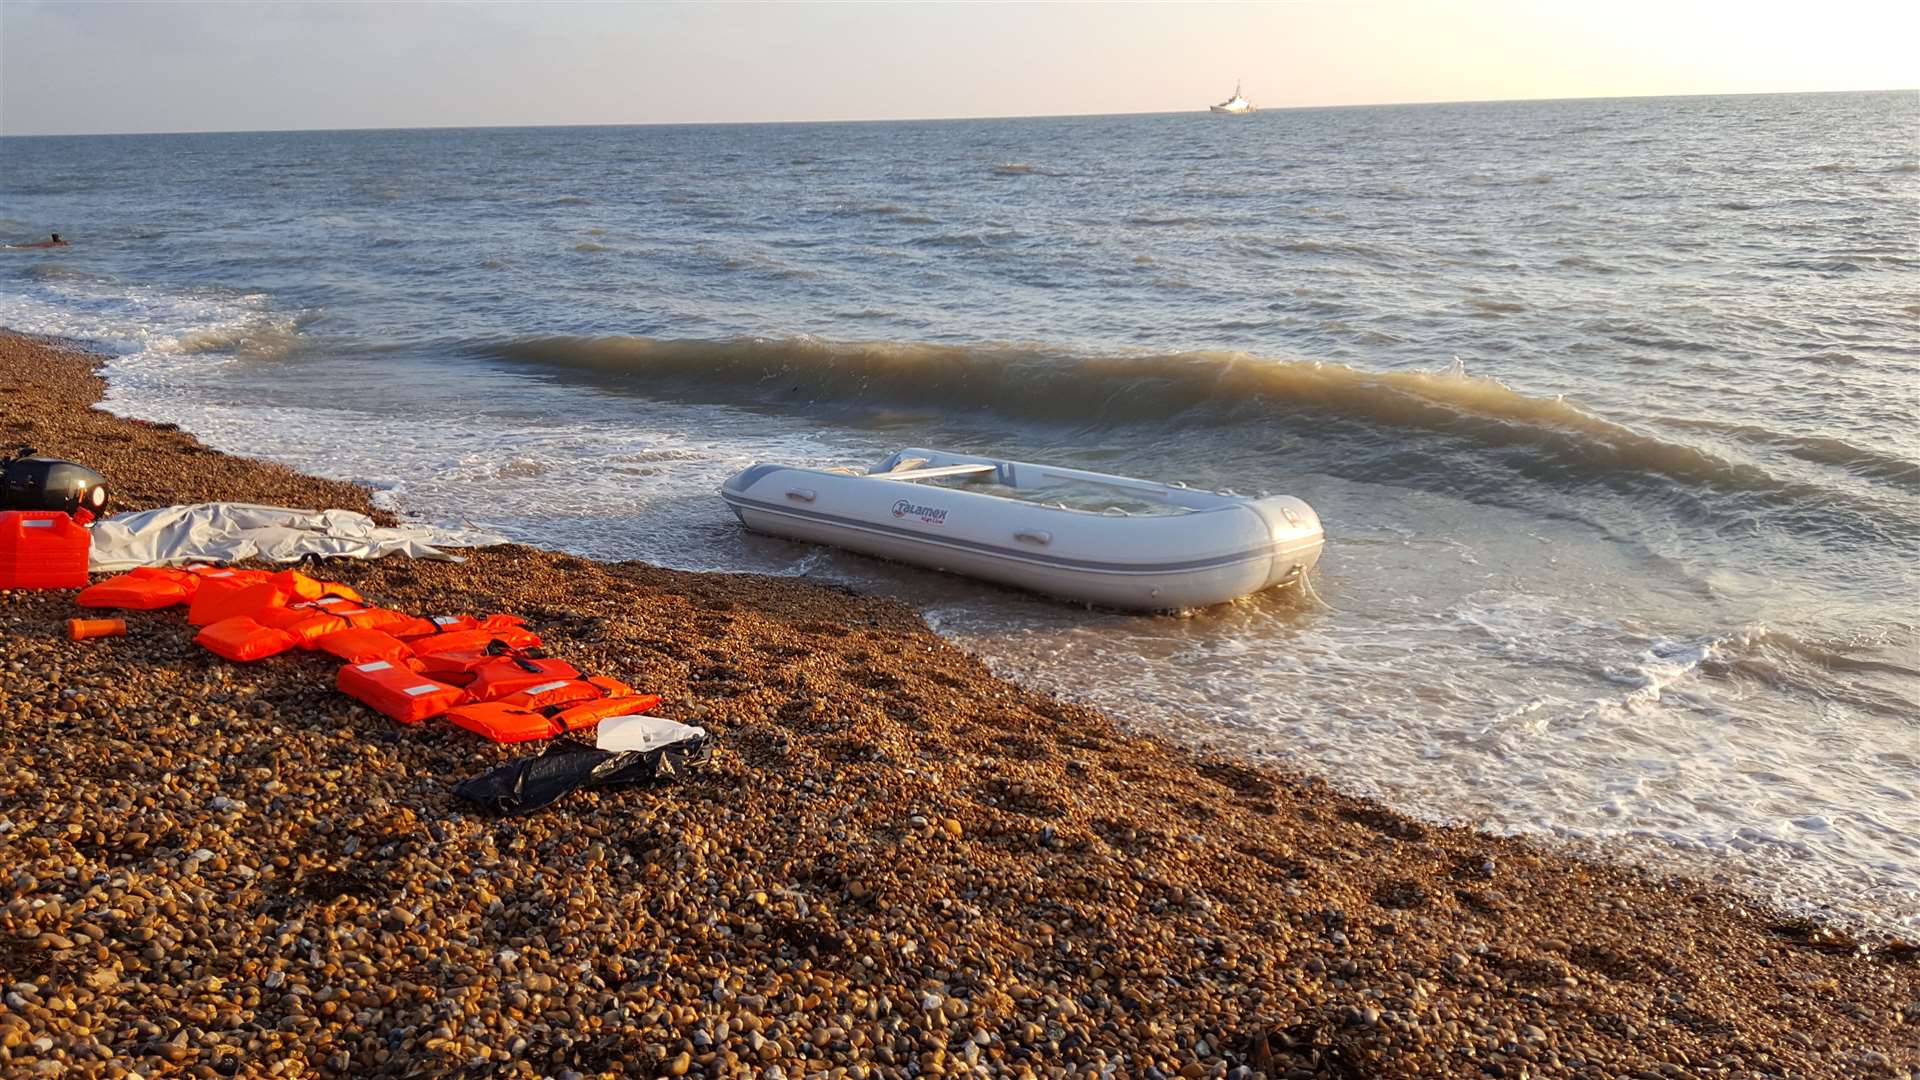 Migrants abandoned a "brand new" dinghy and lifejackets on the beach at Kingsdown (6662838)